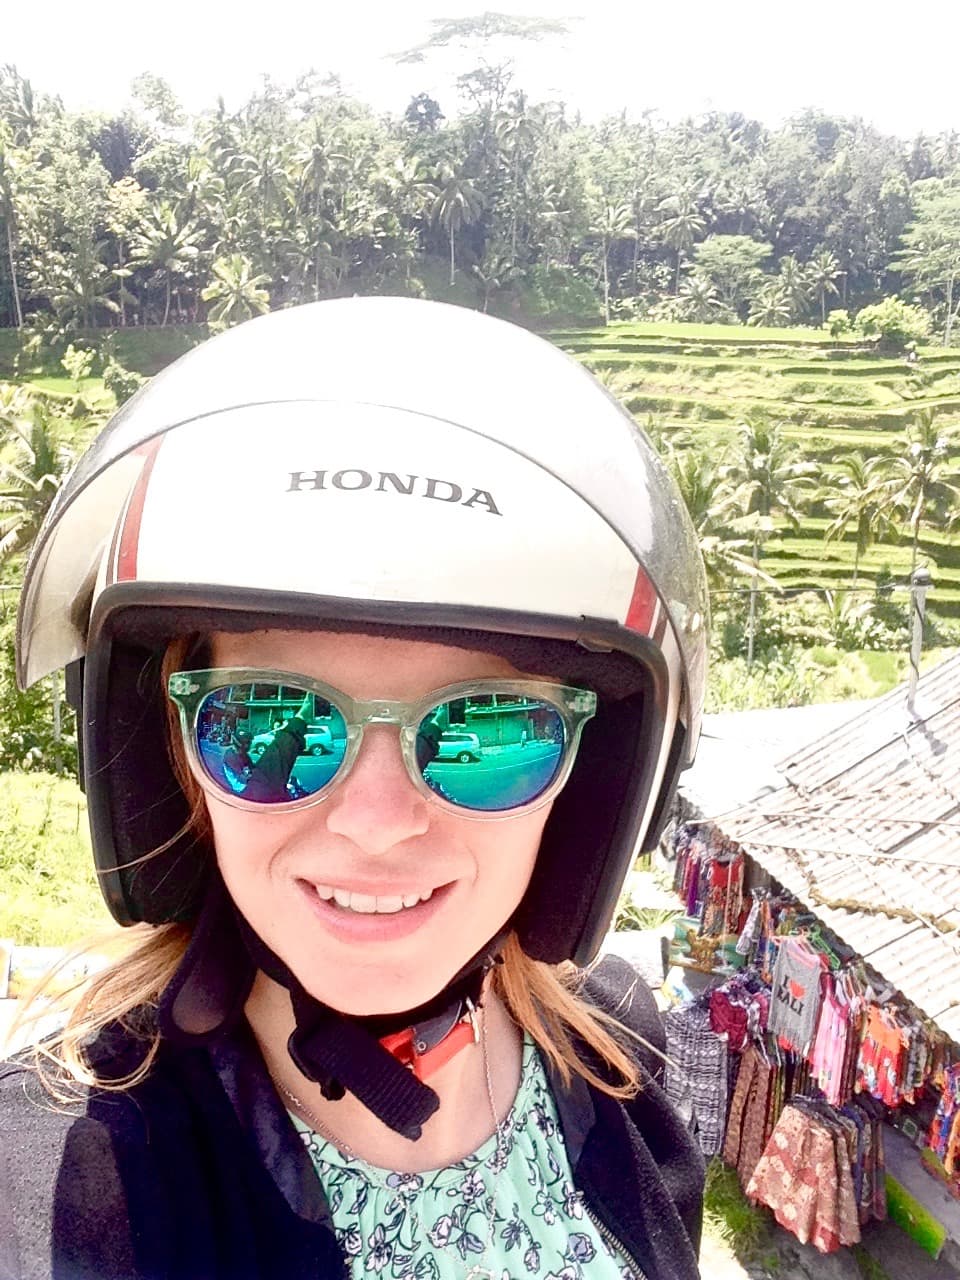 Kitted out to ride a scooter in Ubud, Bali